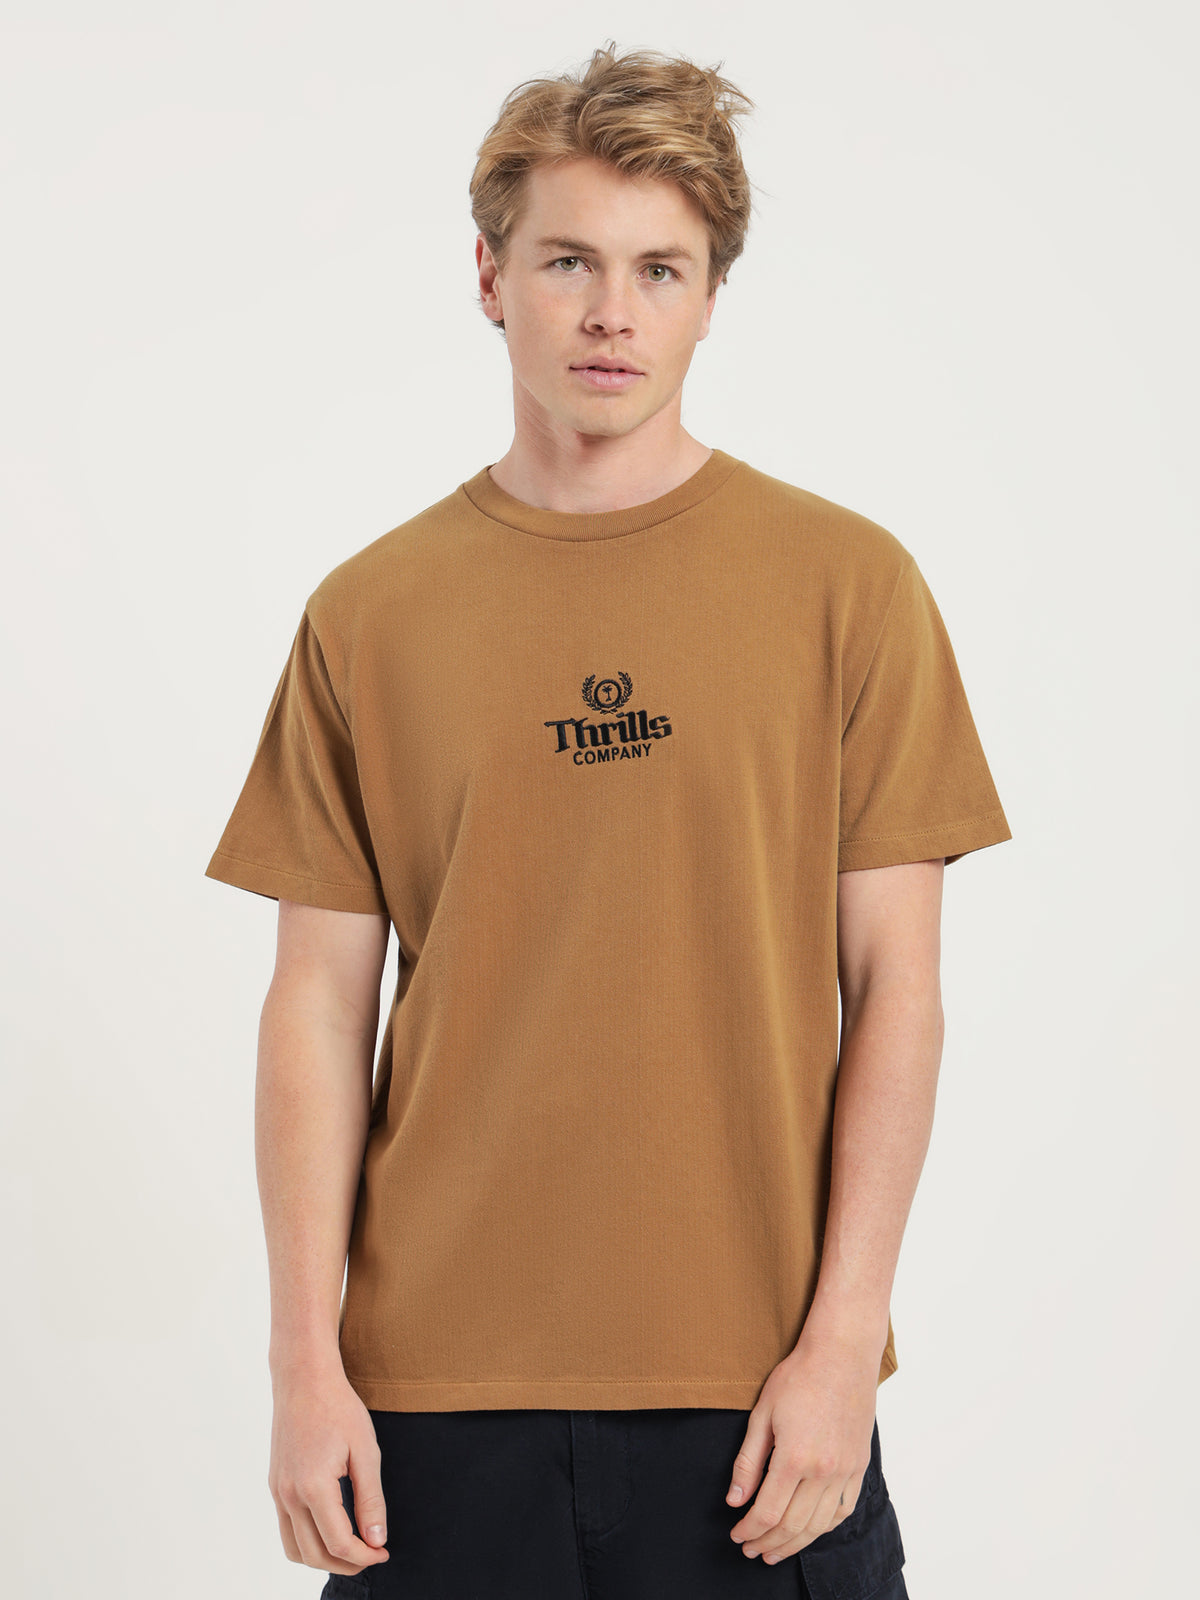 King Embro Merch Fit T-Shirt in Tobacco